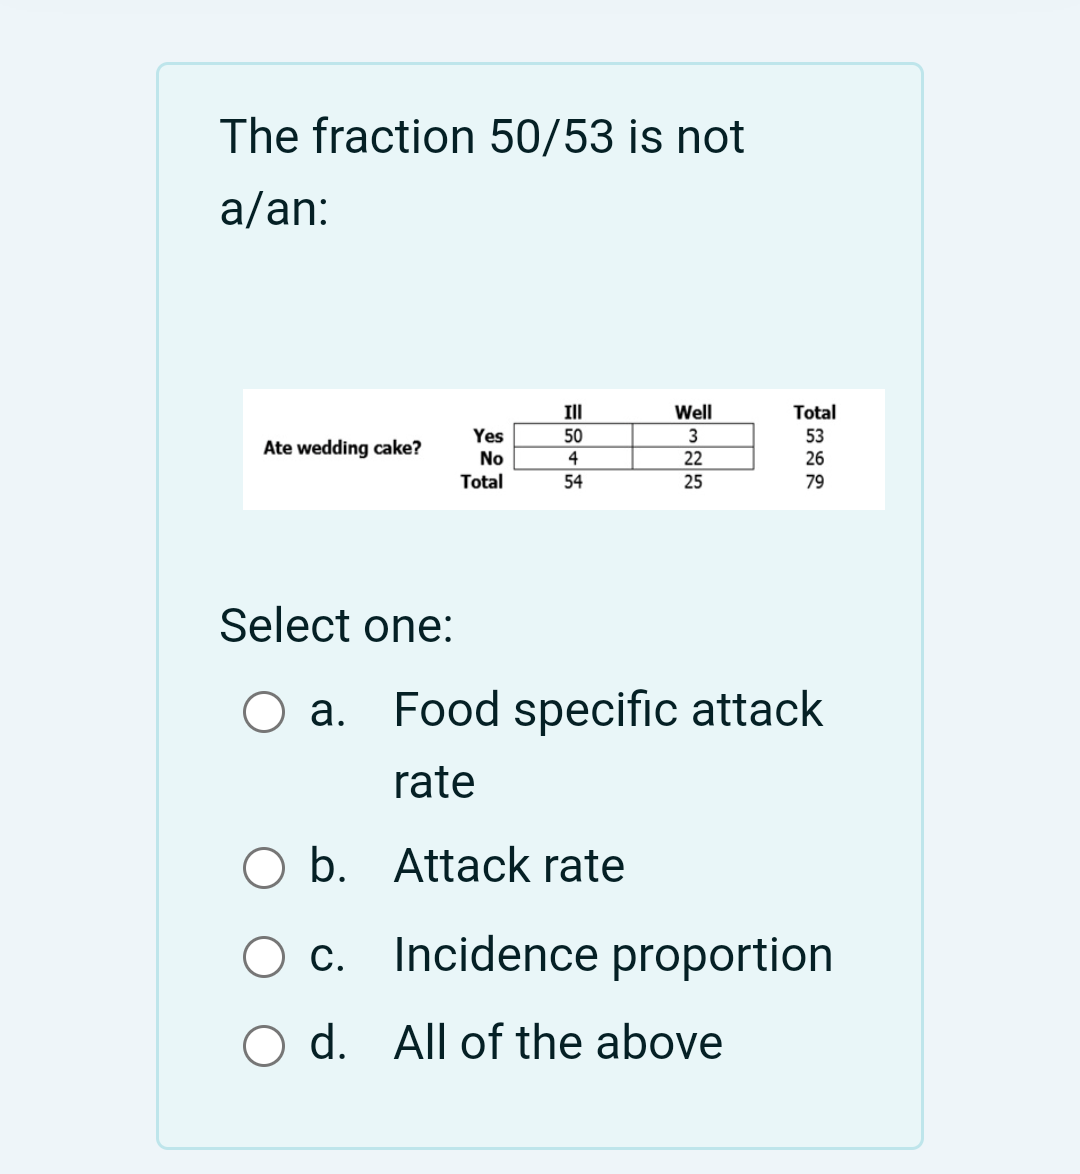 The fraction 50/53 is not
a/an:
Ate wedding cake?
Select one:
O a.
O b.
O c.
d.
Yes
No
Total
Ill
50
4
54
Well
3
22
25
Total
53
26
79
Food specific attack
rate
Attack rate
Incidence proportion
All of the above